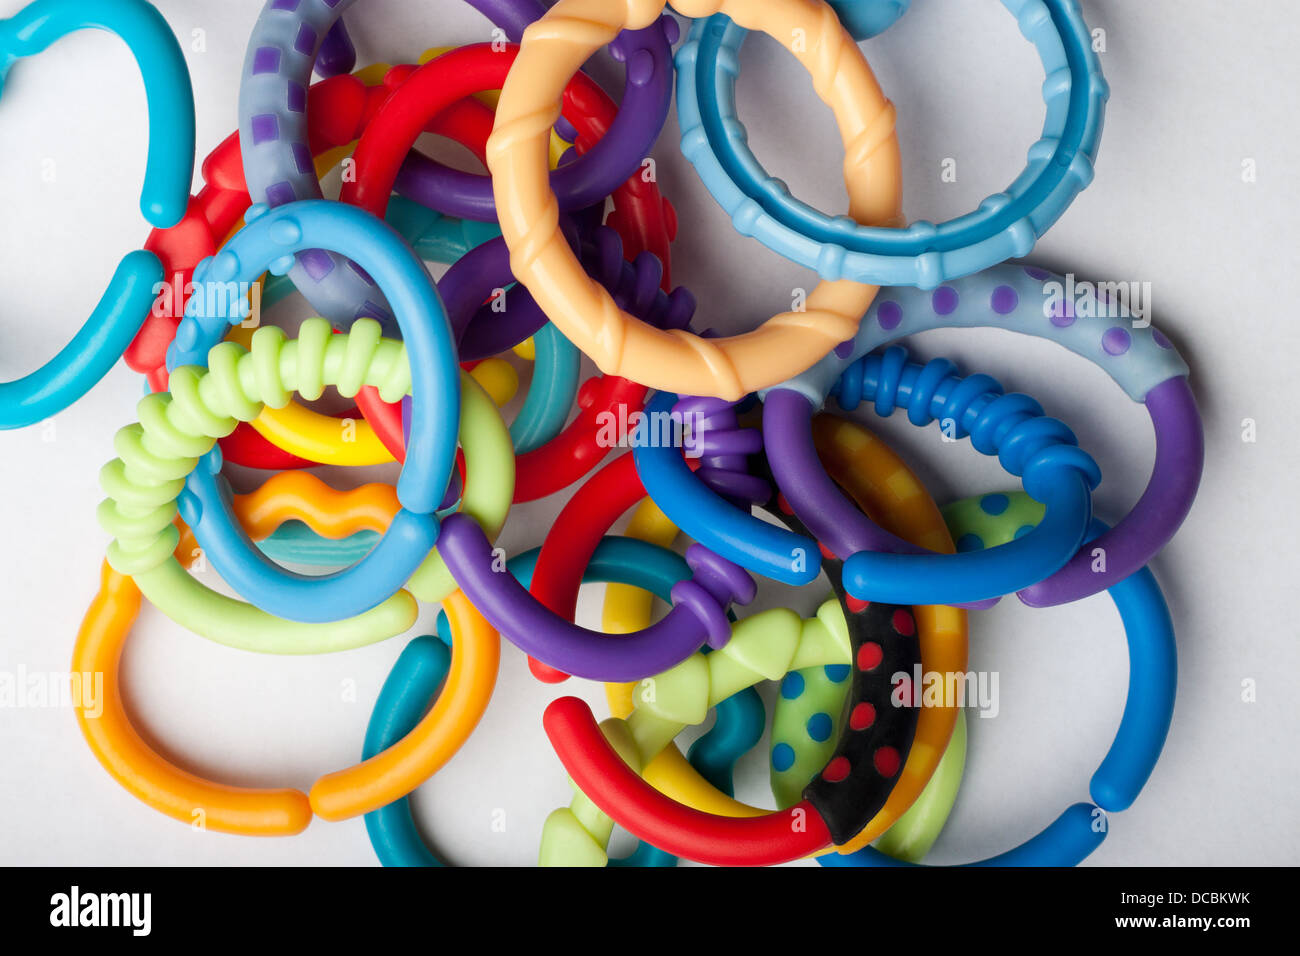 Pile of baby links on white surface Stock Photo